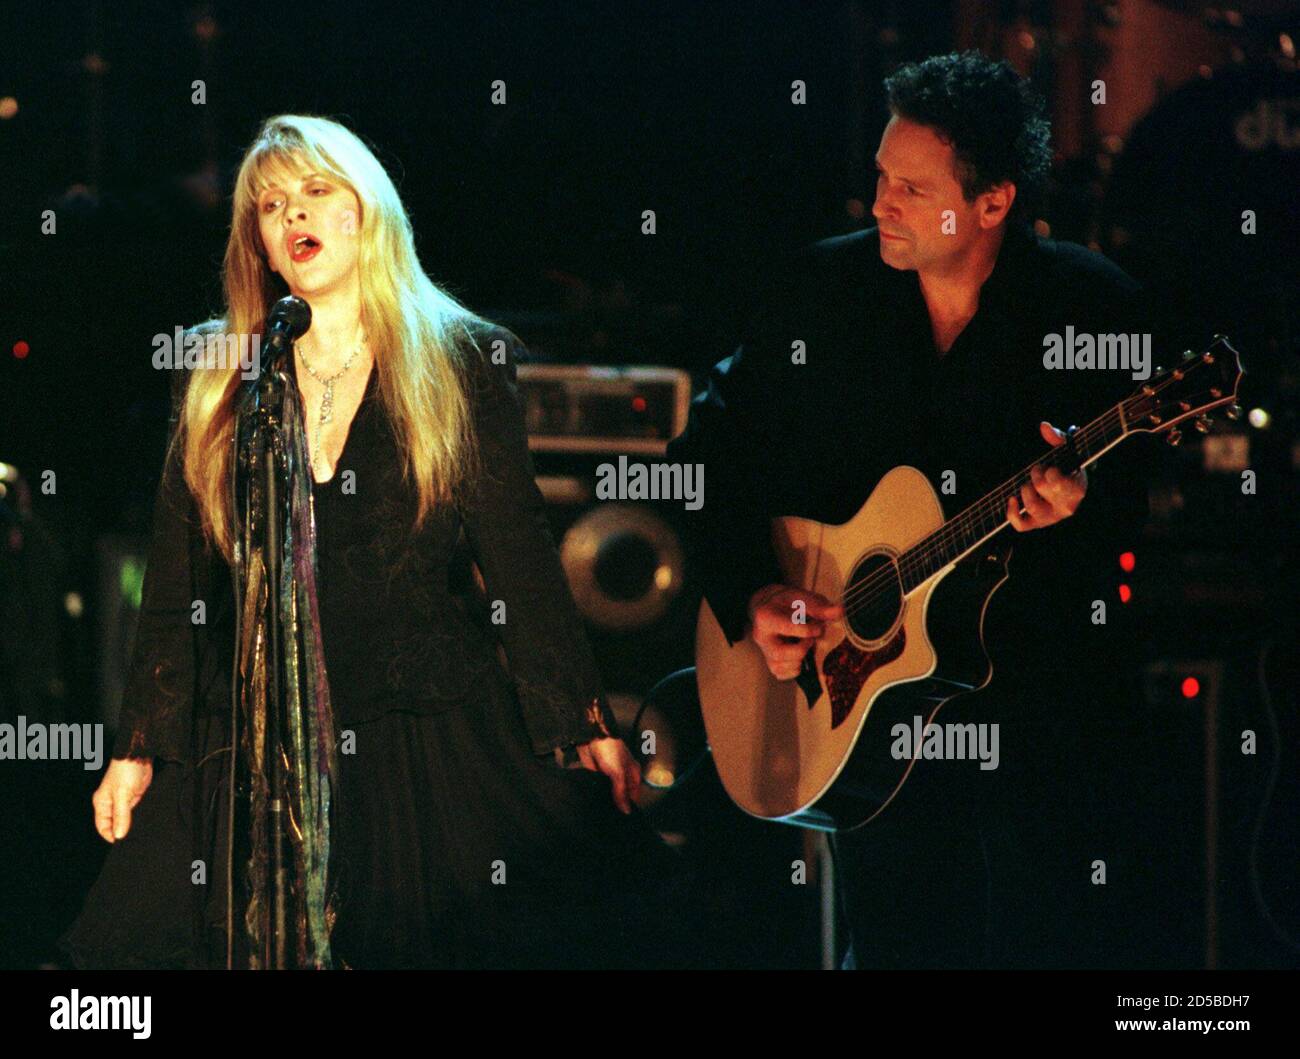 Stevie Nicks (L) and Lindsey Buckingham of the band Fleetwood Mac perform  on stage after the band was inducted into the Rock and Roll Hall of Fame at  the Rock and Roll